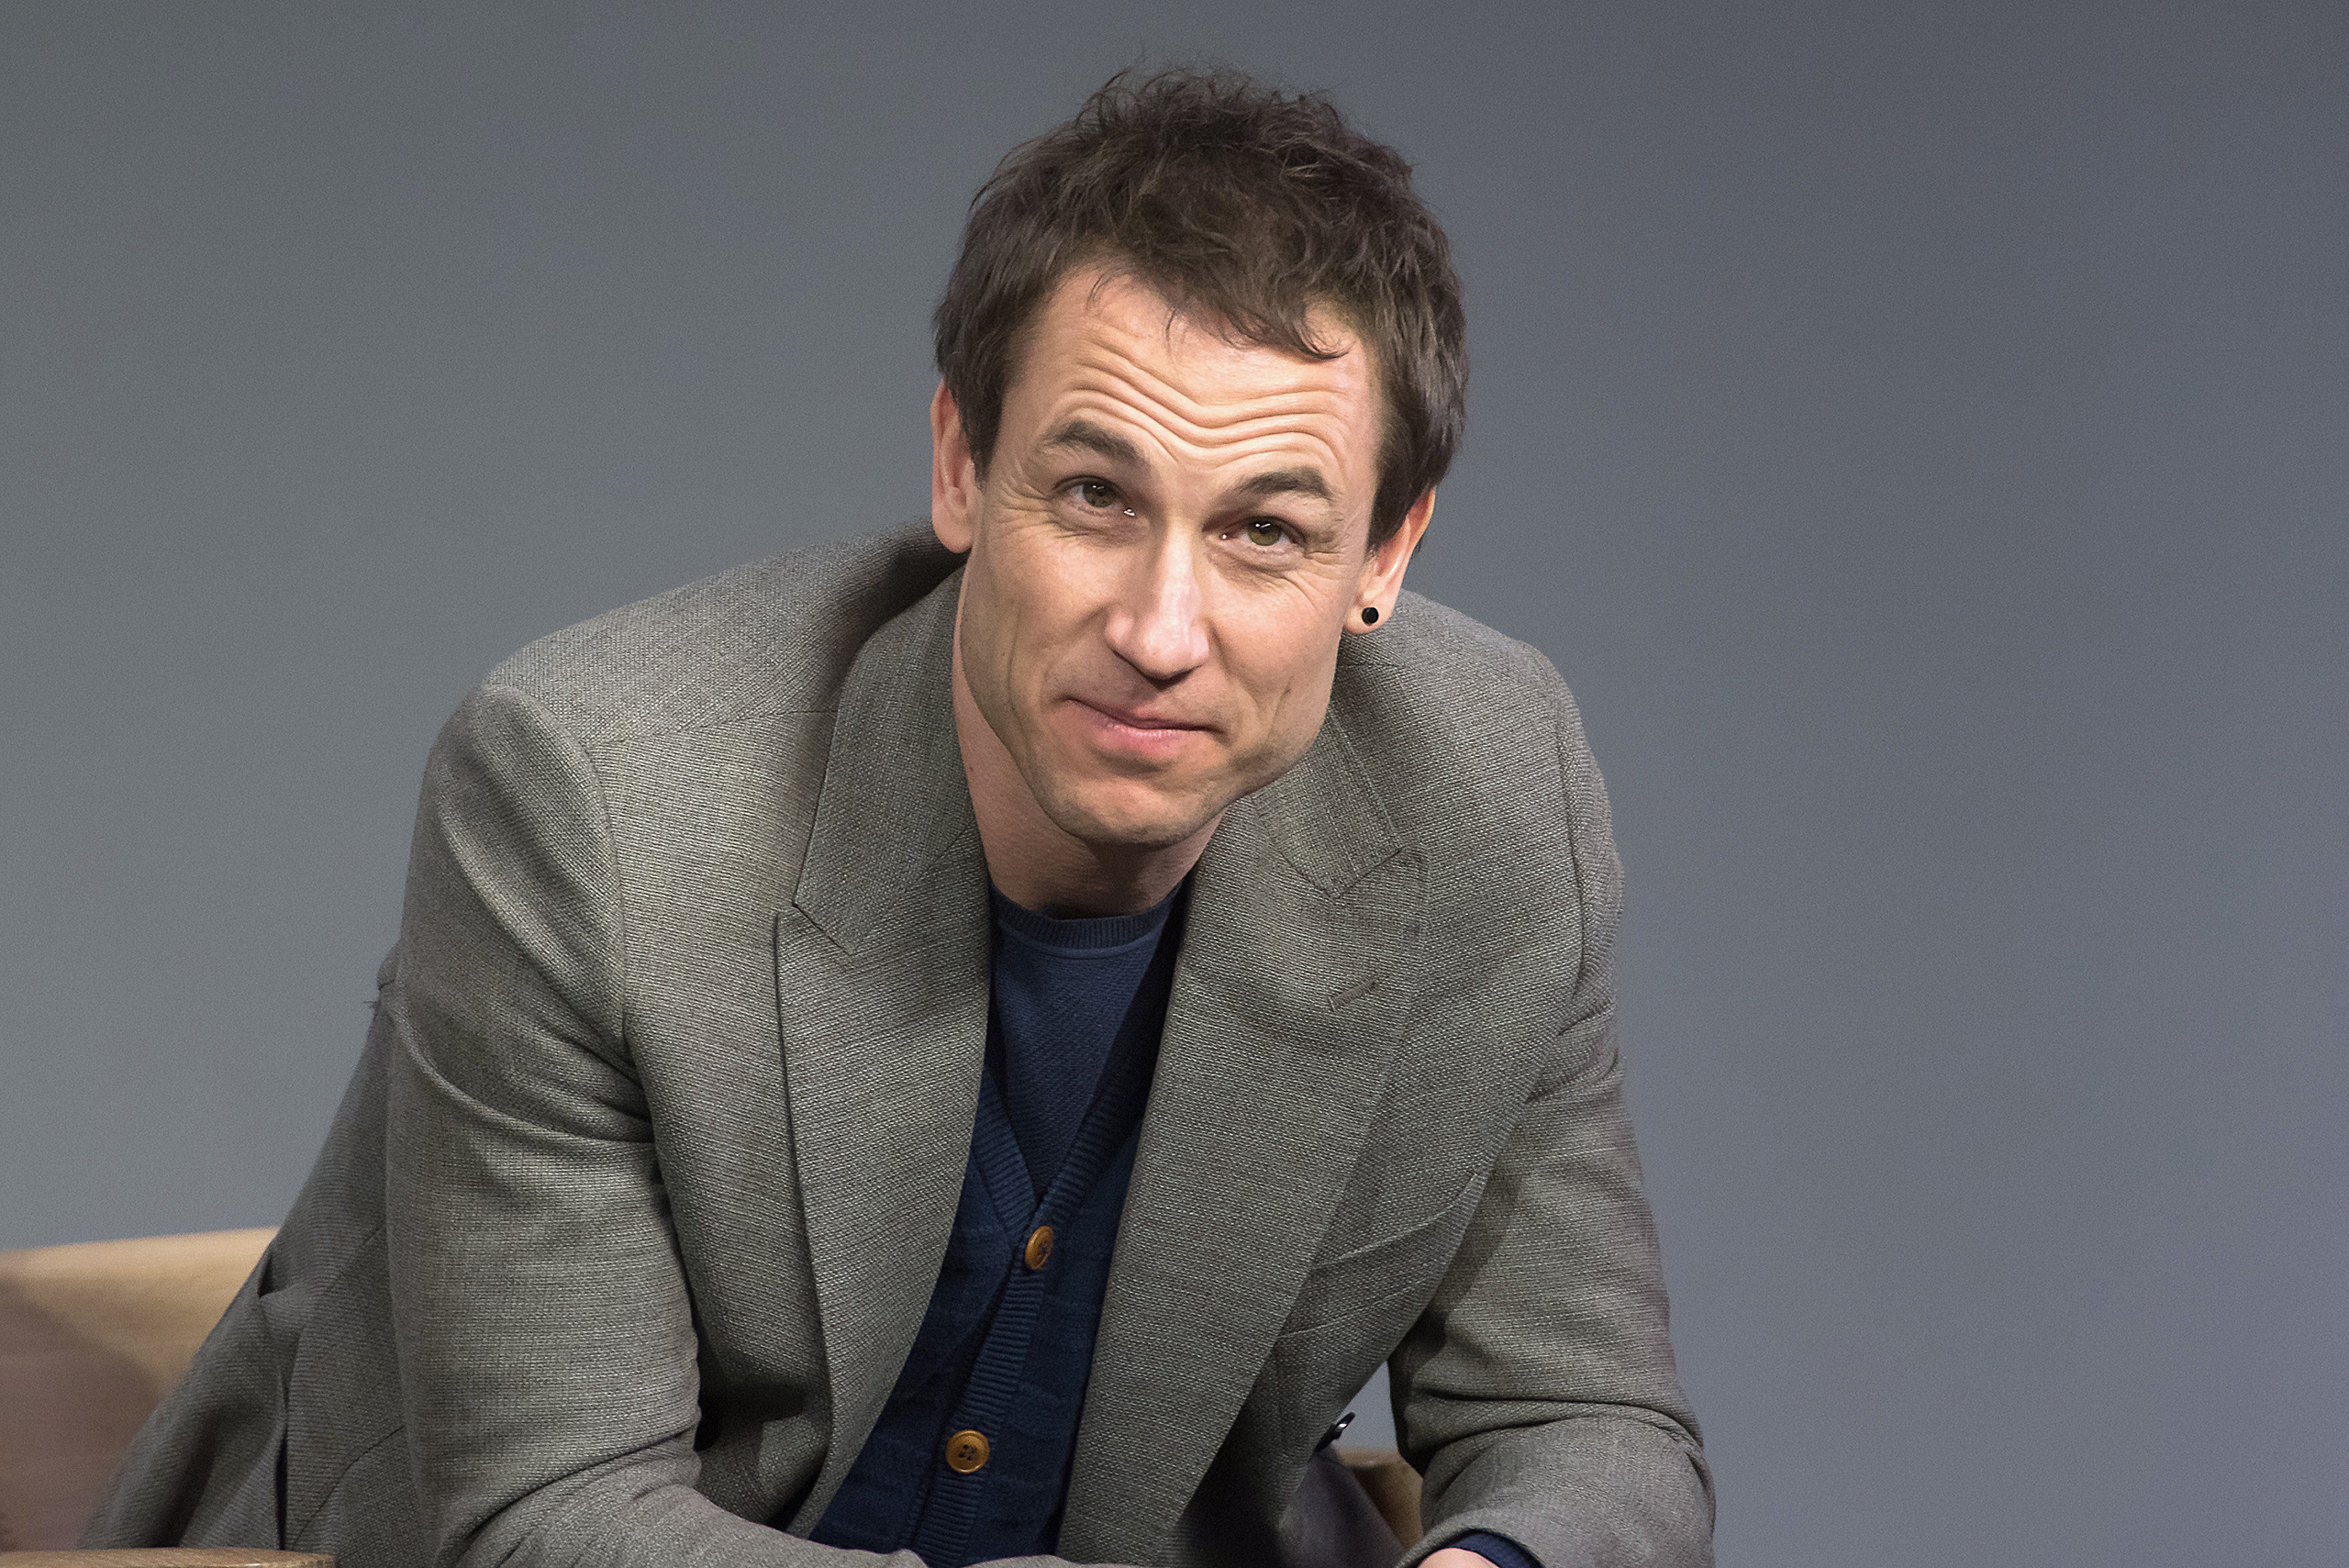 Tobias Menzies attends Apple Store Soho Presents Meet the Cast: "Outlander" at Apple Store Soho in New York City on April 6, 2016. (Mike Pont—WireImage/Getty Images)